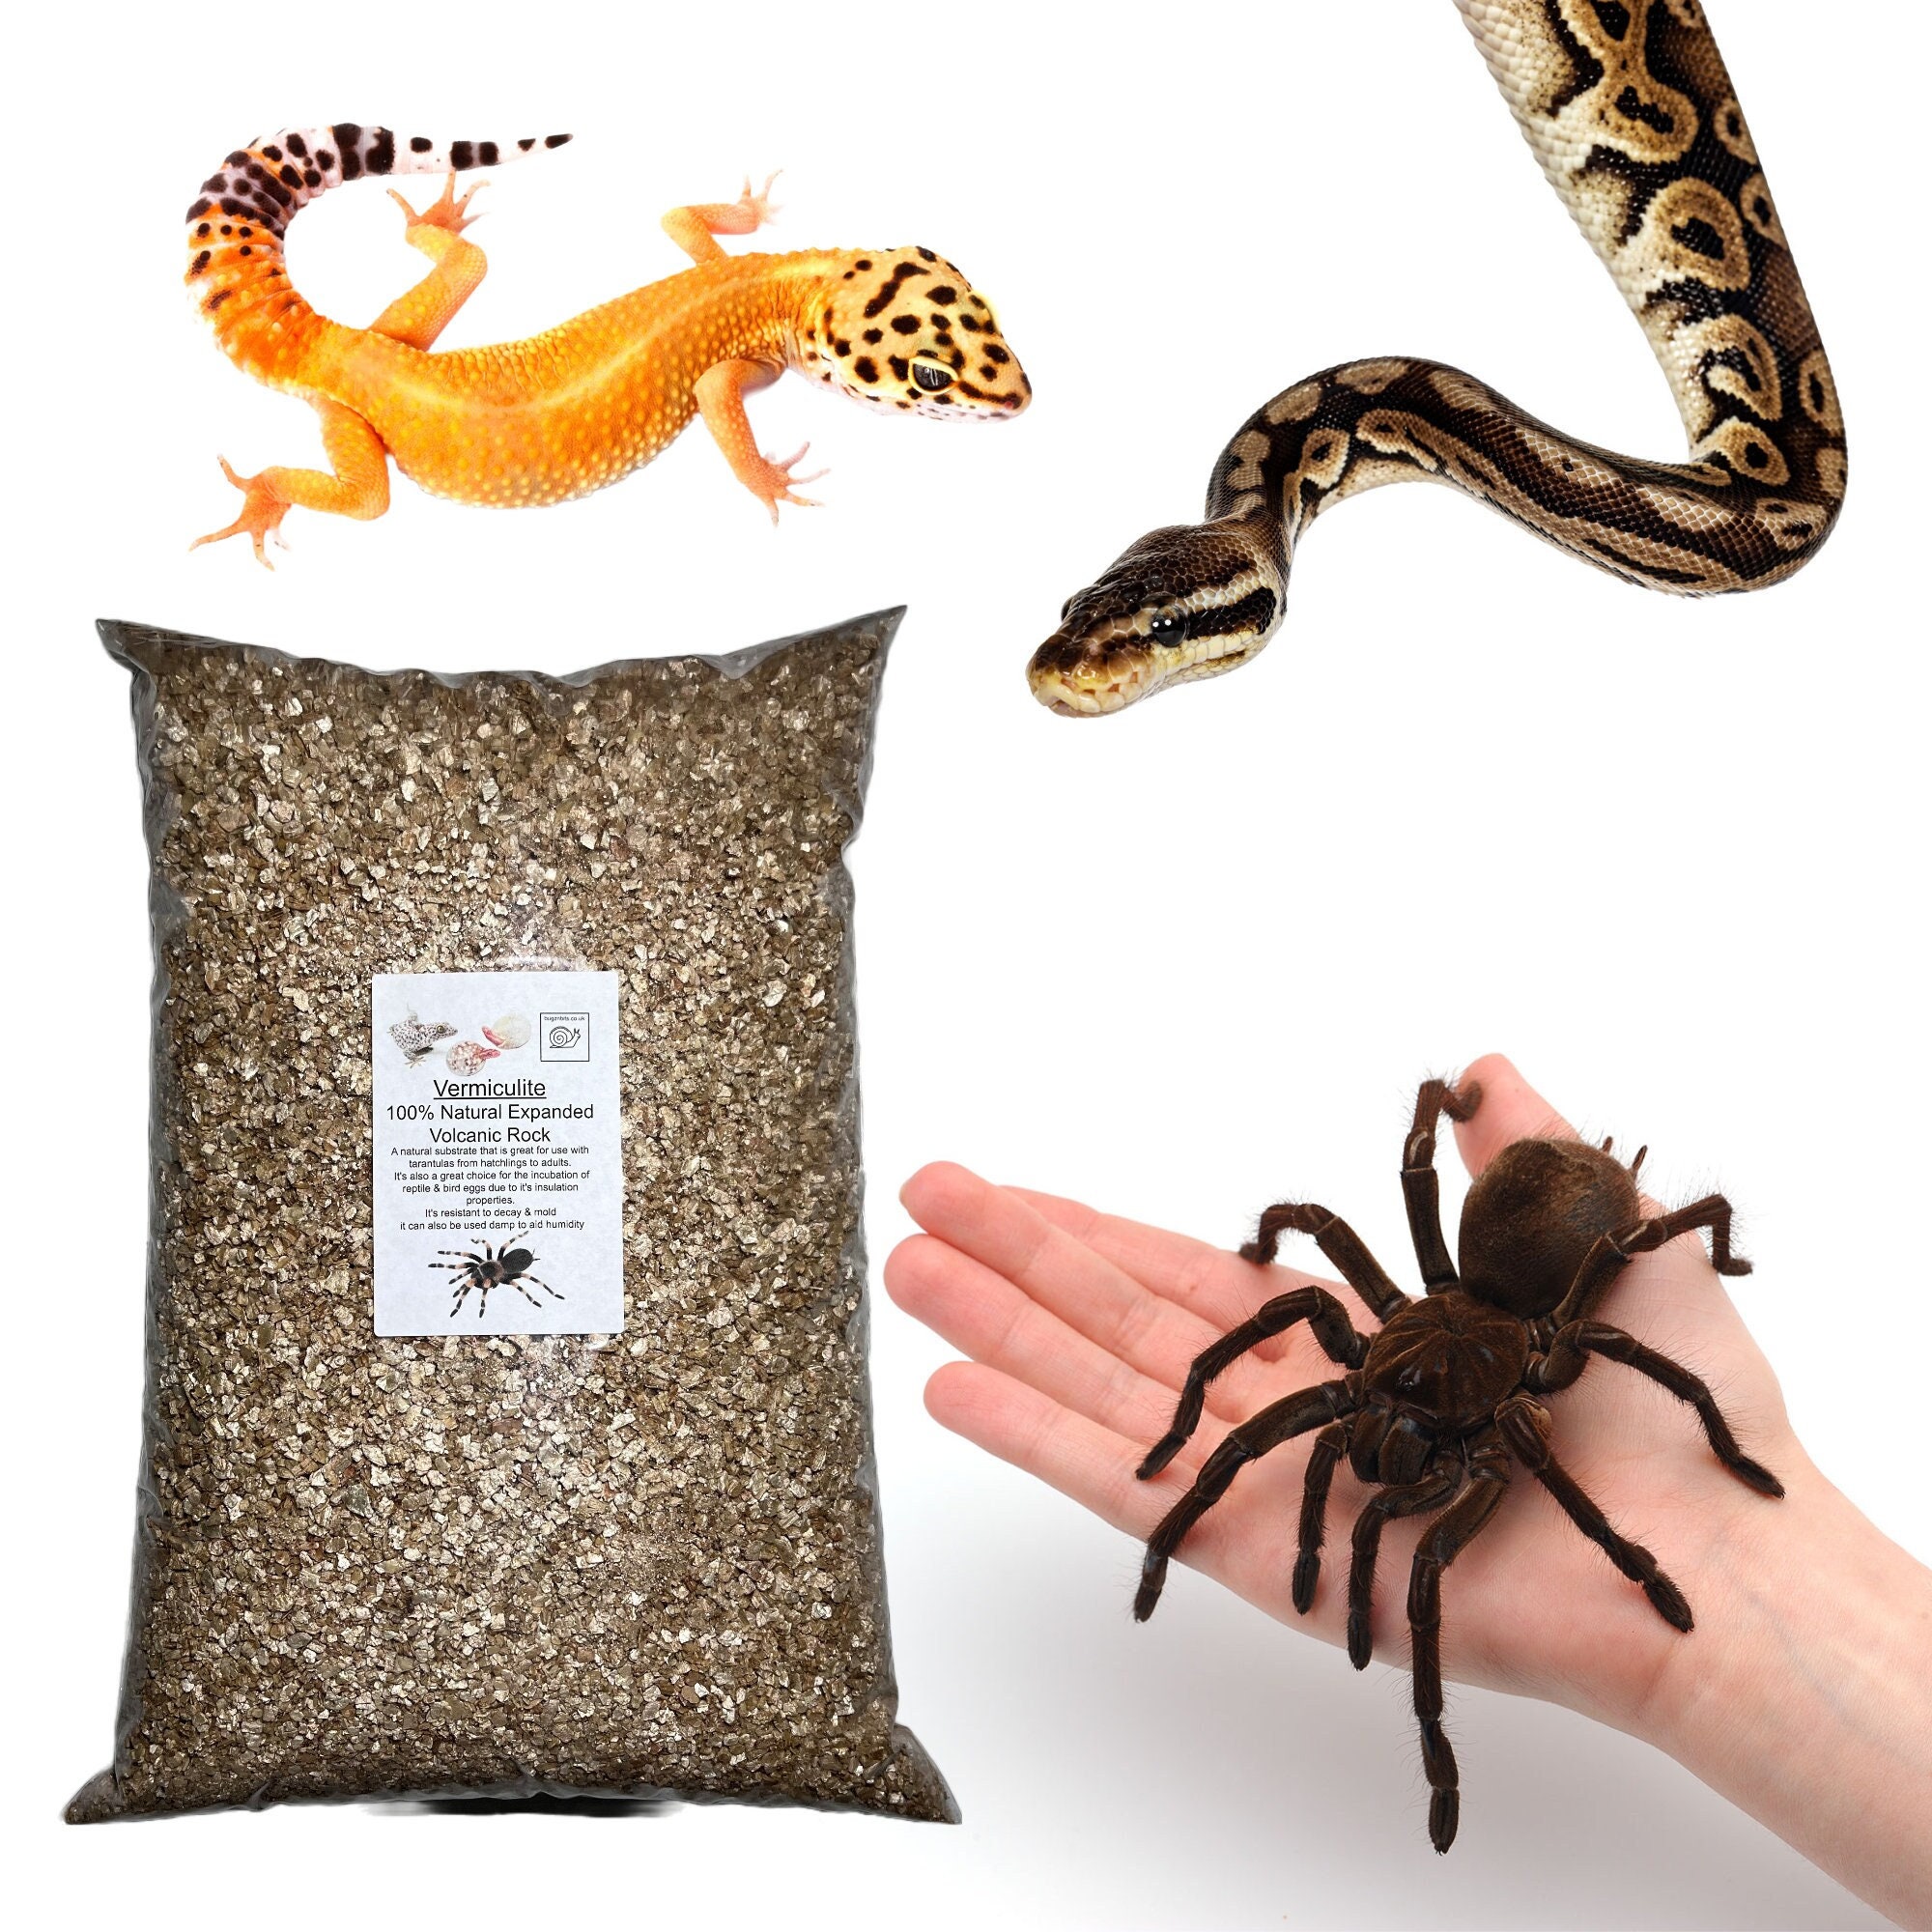 Where should I buy my tarantula supplies from? Enclosures, hides,  substrate, etc. I'm having a hard time finding them locally. : r/tarantulas